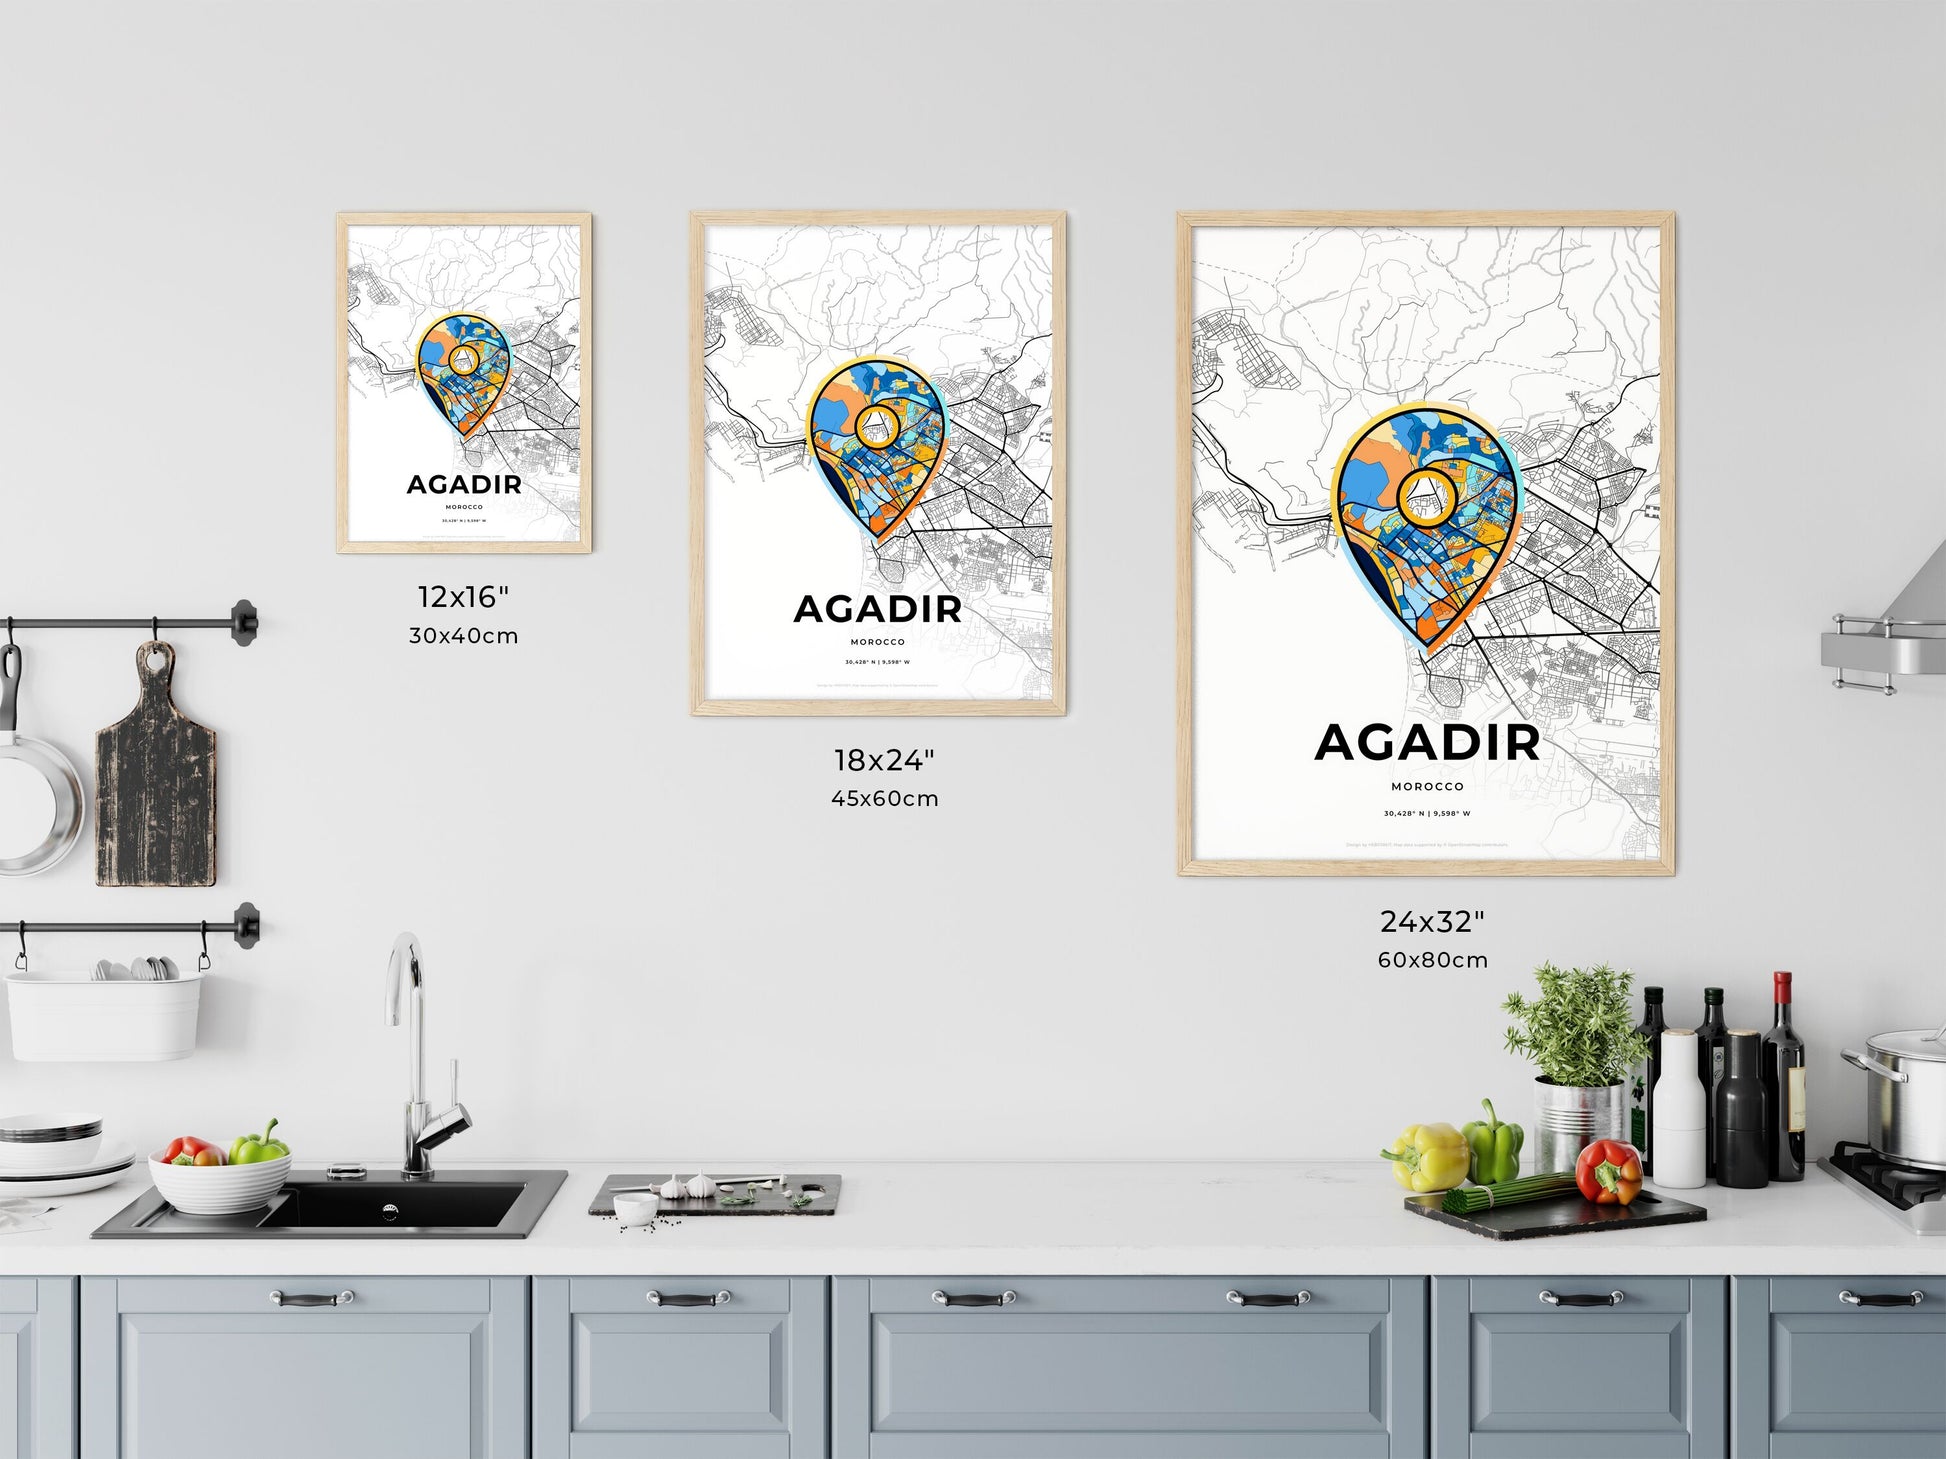 AGADIR MOROCCO minimal art map with a colorful icon. Where it all began, Couple map gift.